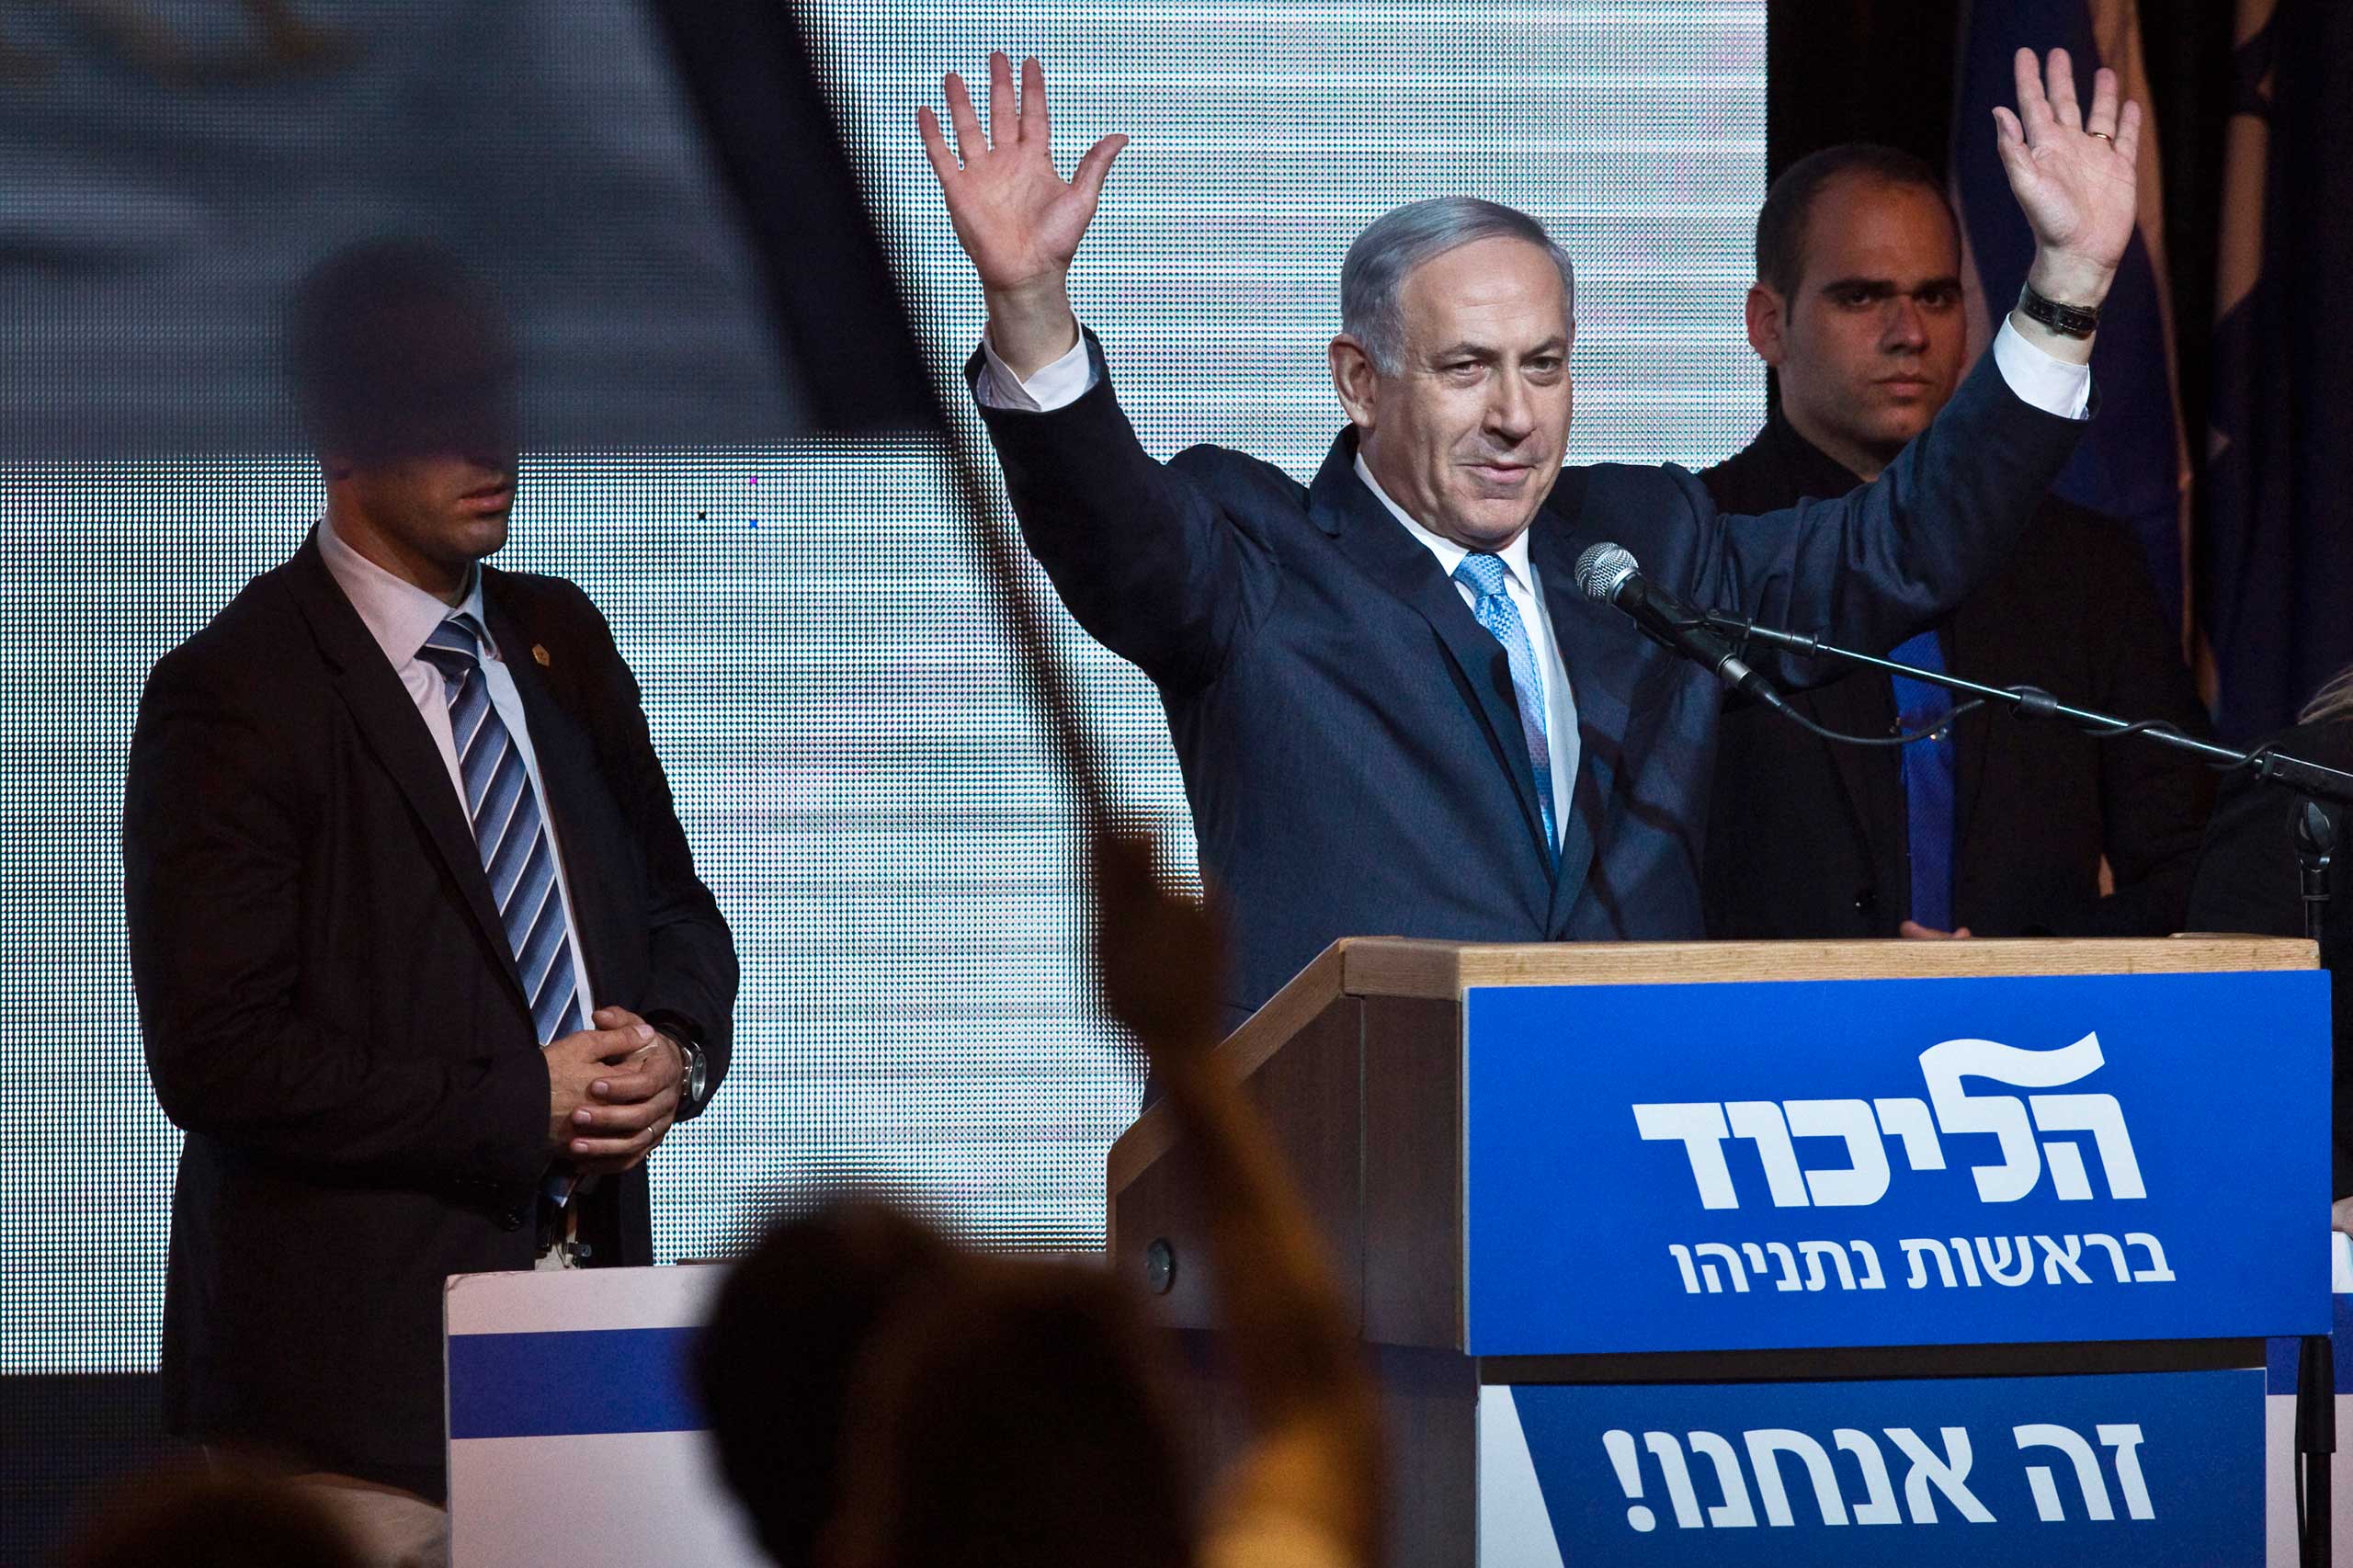 Israeli Prime Minister Benjamin Netanyahu delivers a speech to supporters at party headquarters in Tel Aviv on March 18, 2015.